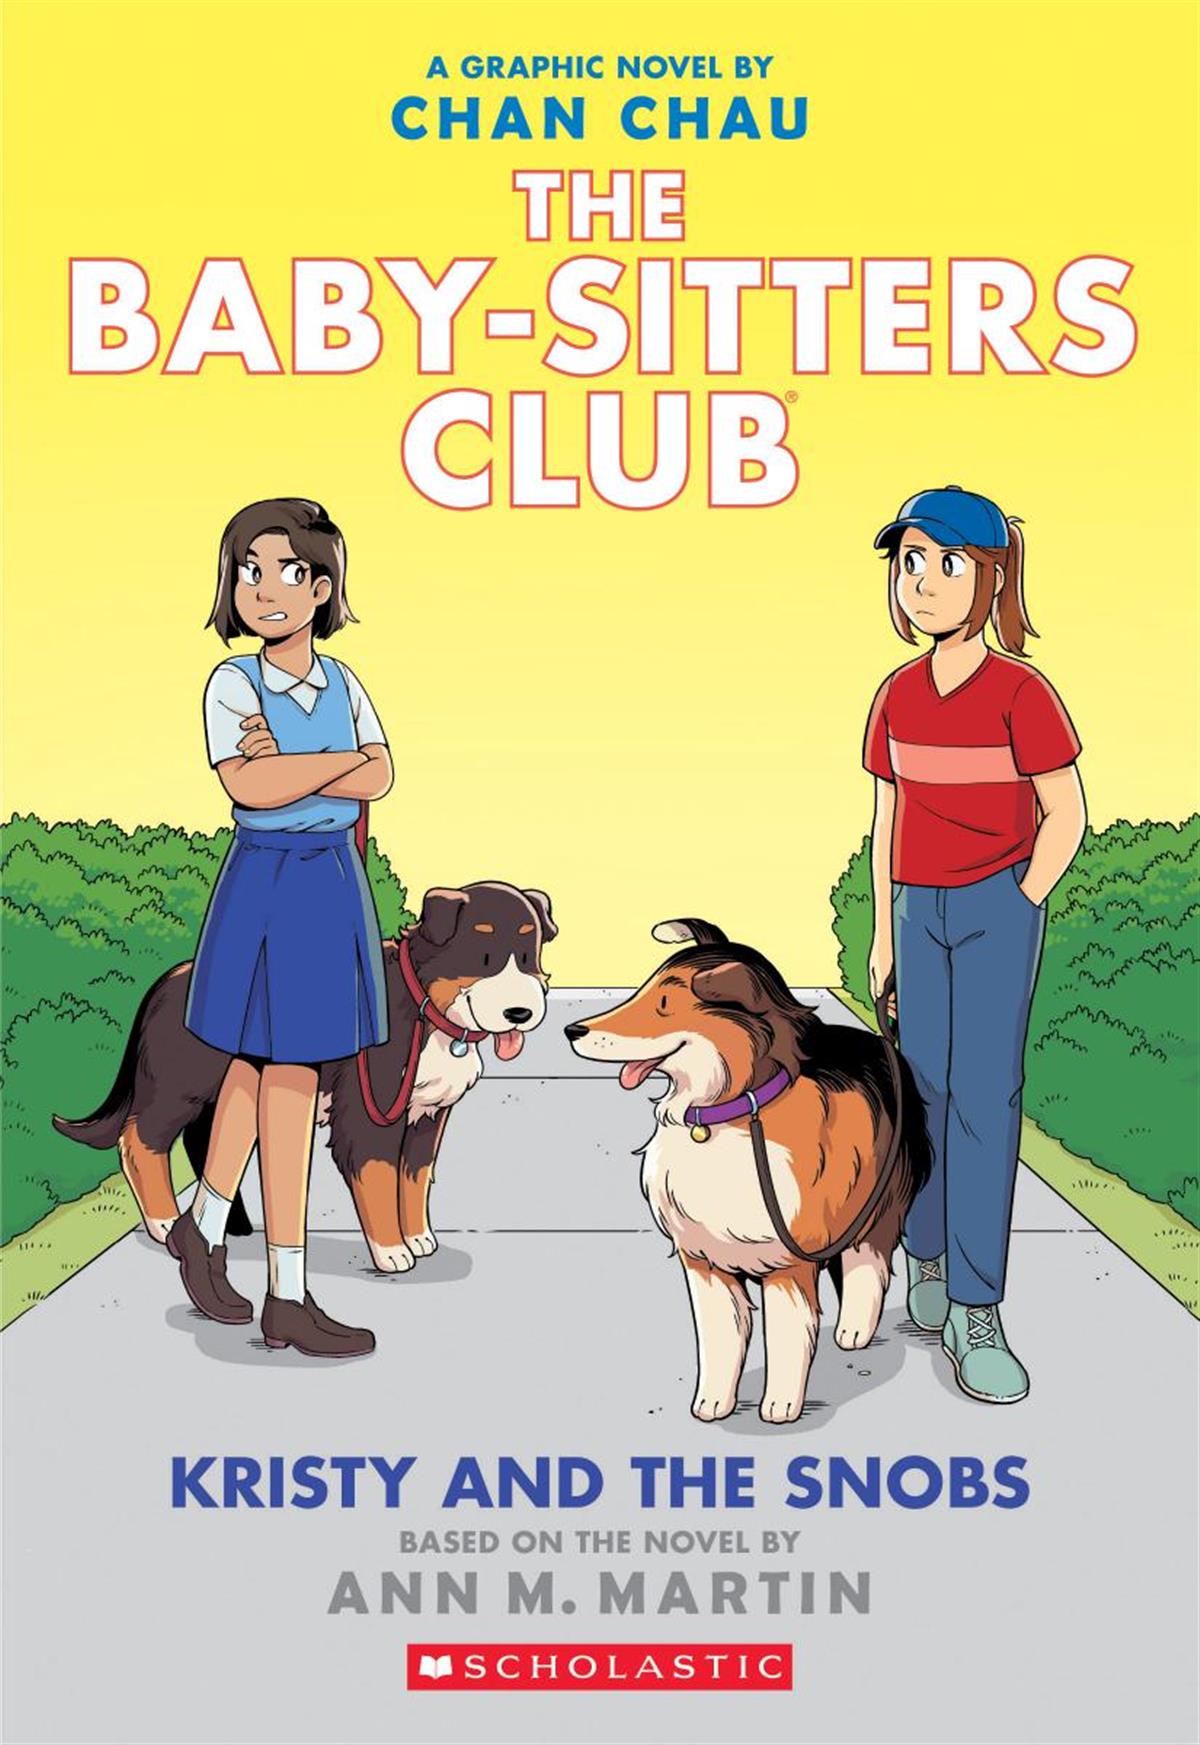 Kristy and the Snobs: A Graphic Novel (The Baby-sitters Club #10)